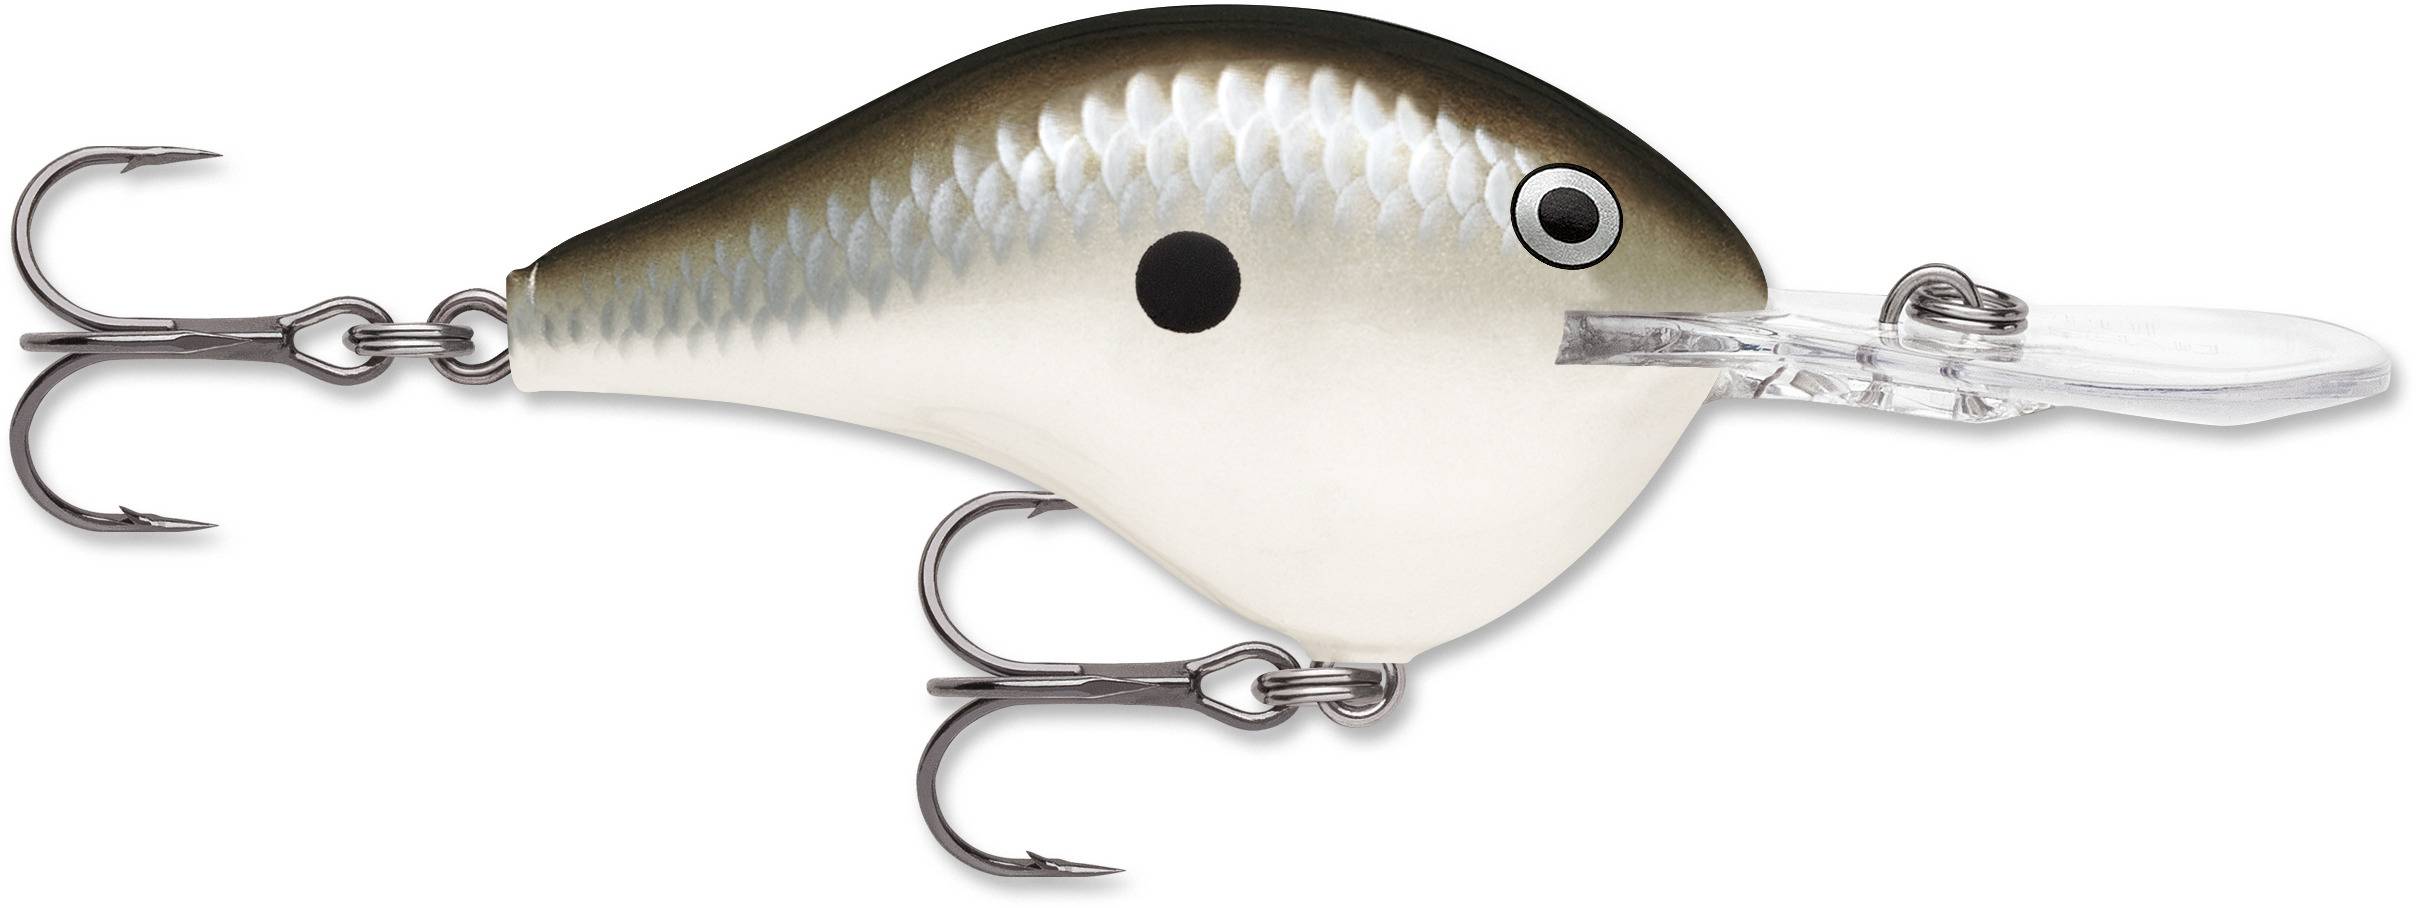 Rapala Dt (Dives To) Series DT14